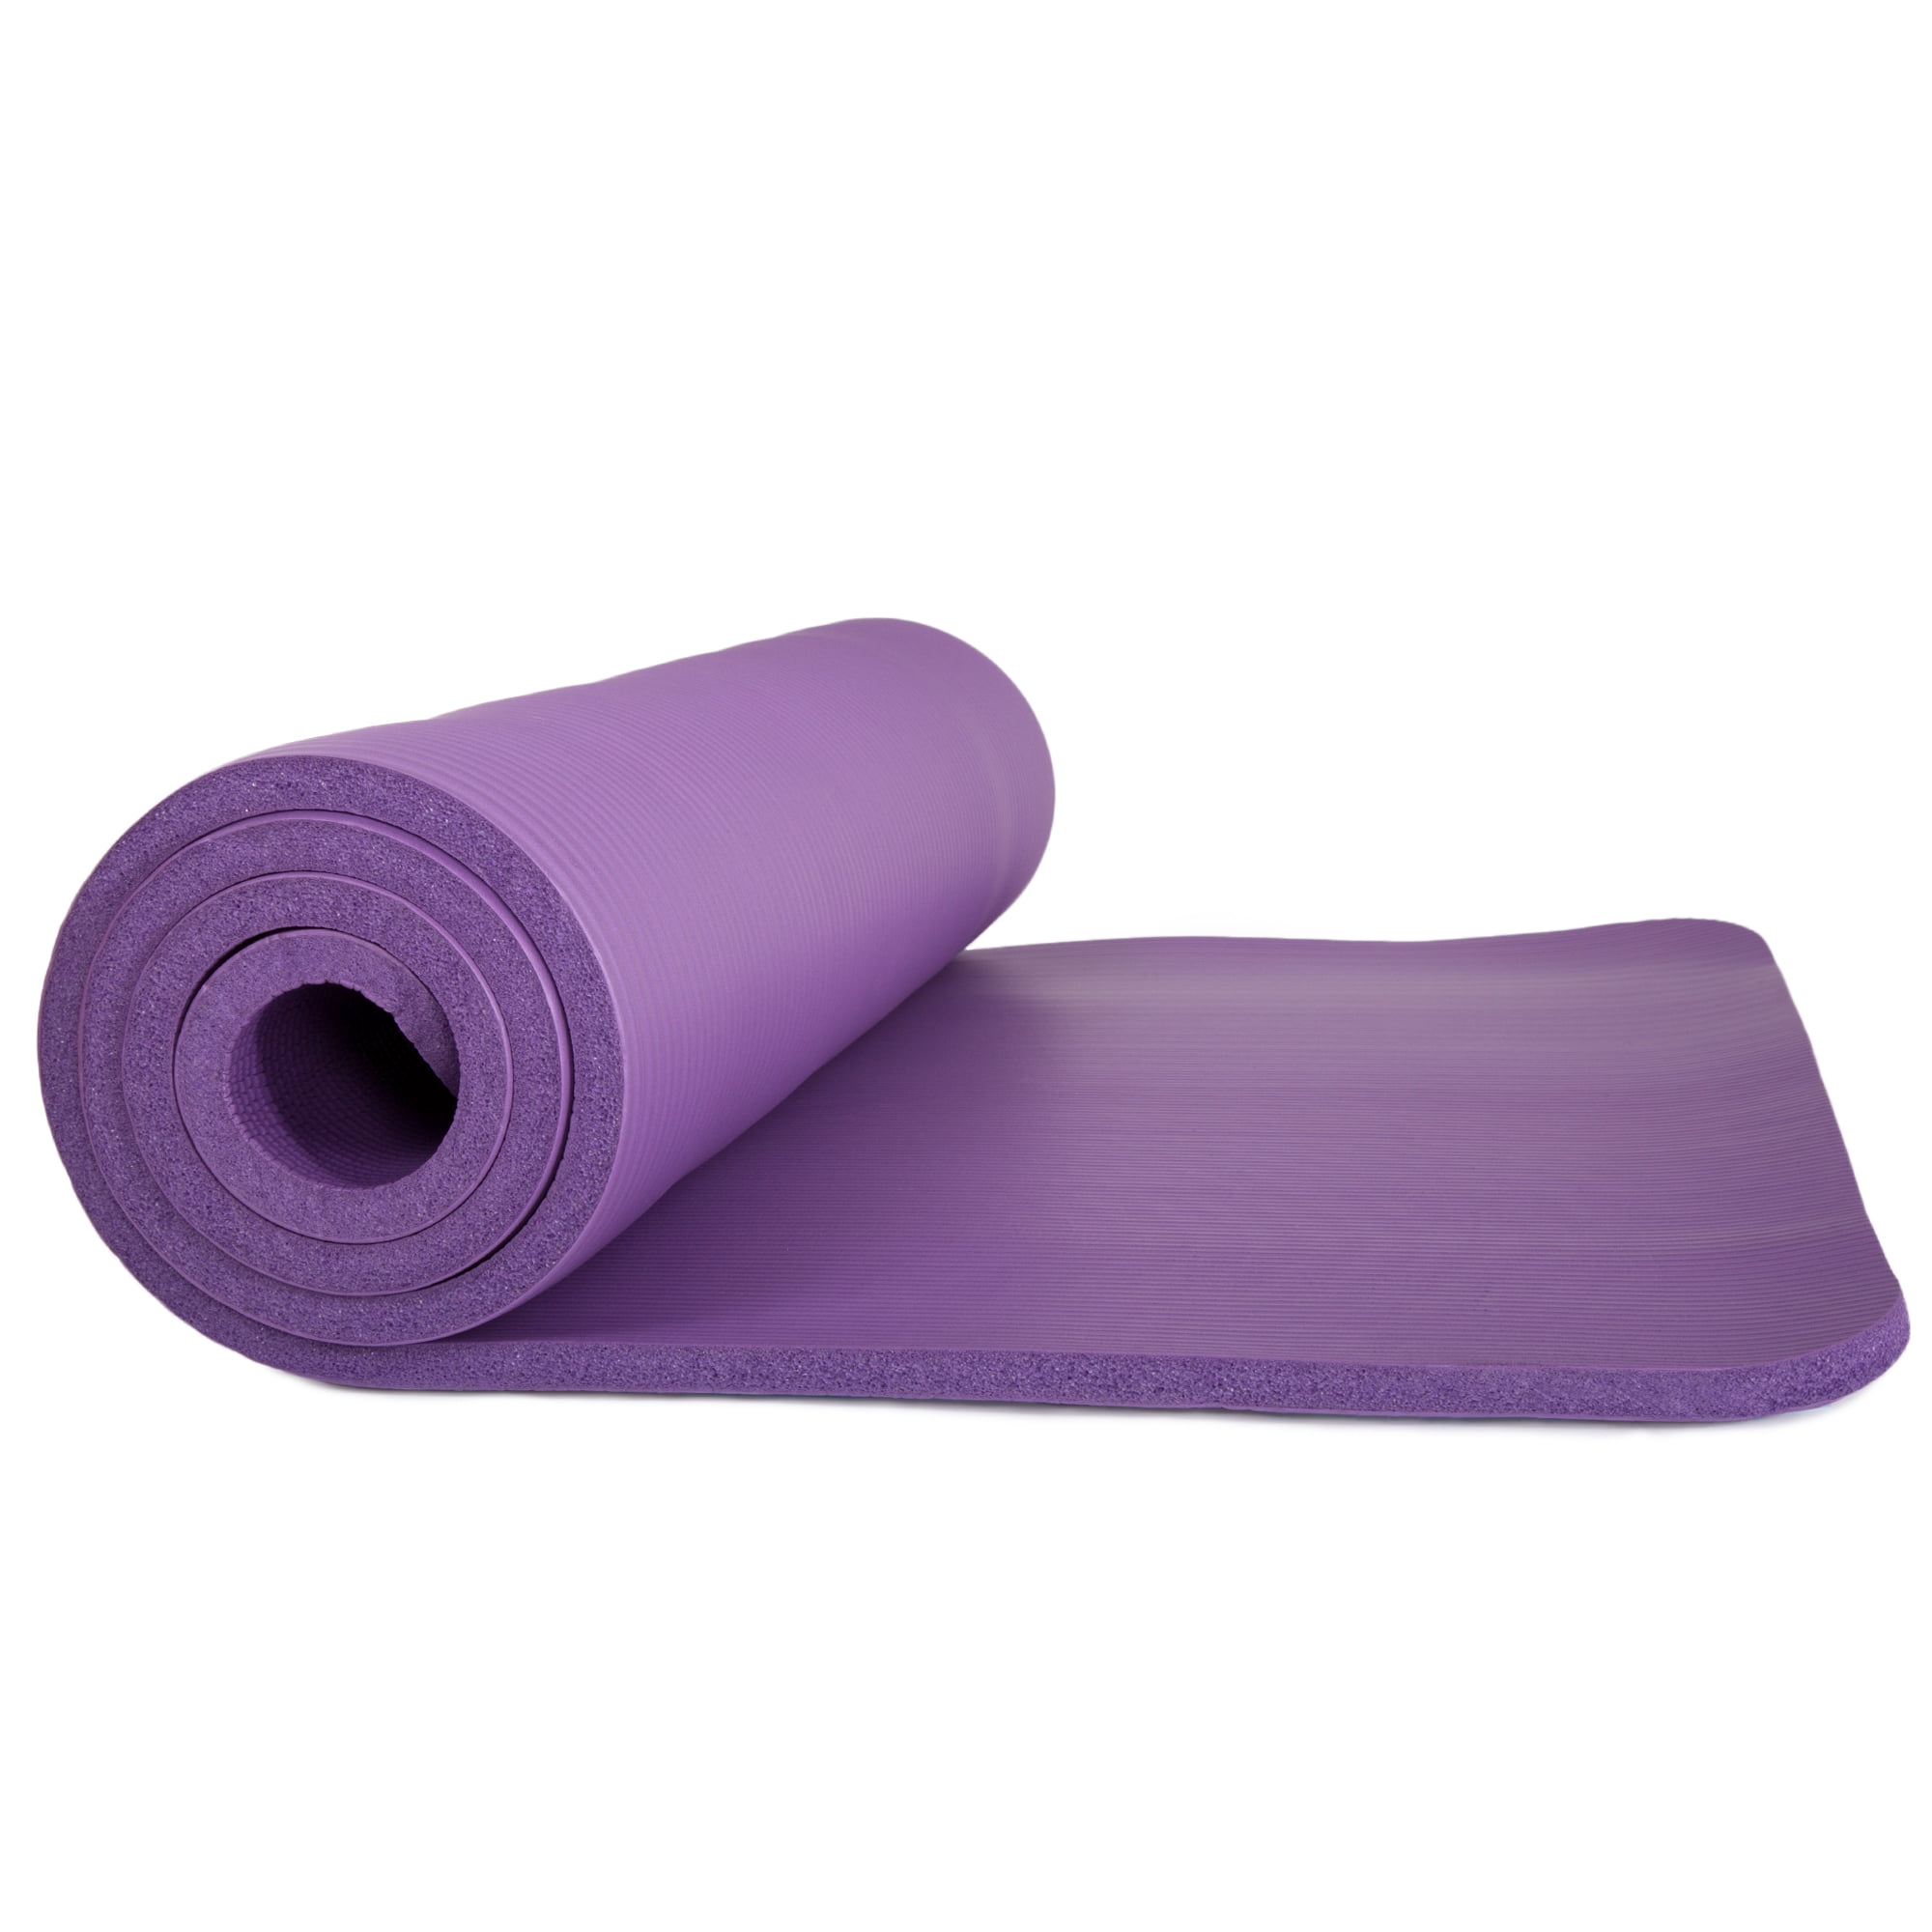 Using Yoga Mat as Sleeping Pad for Camping? Here's What We Think About  That!